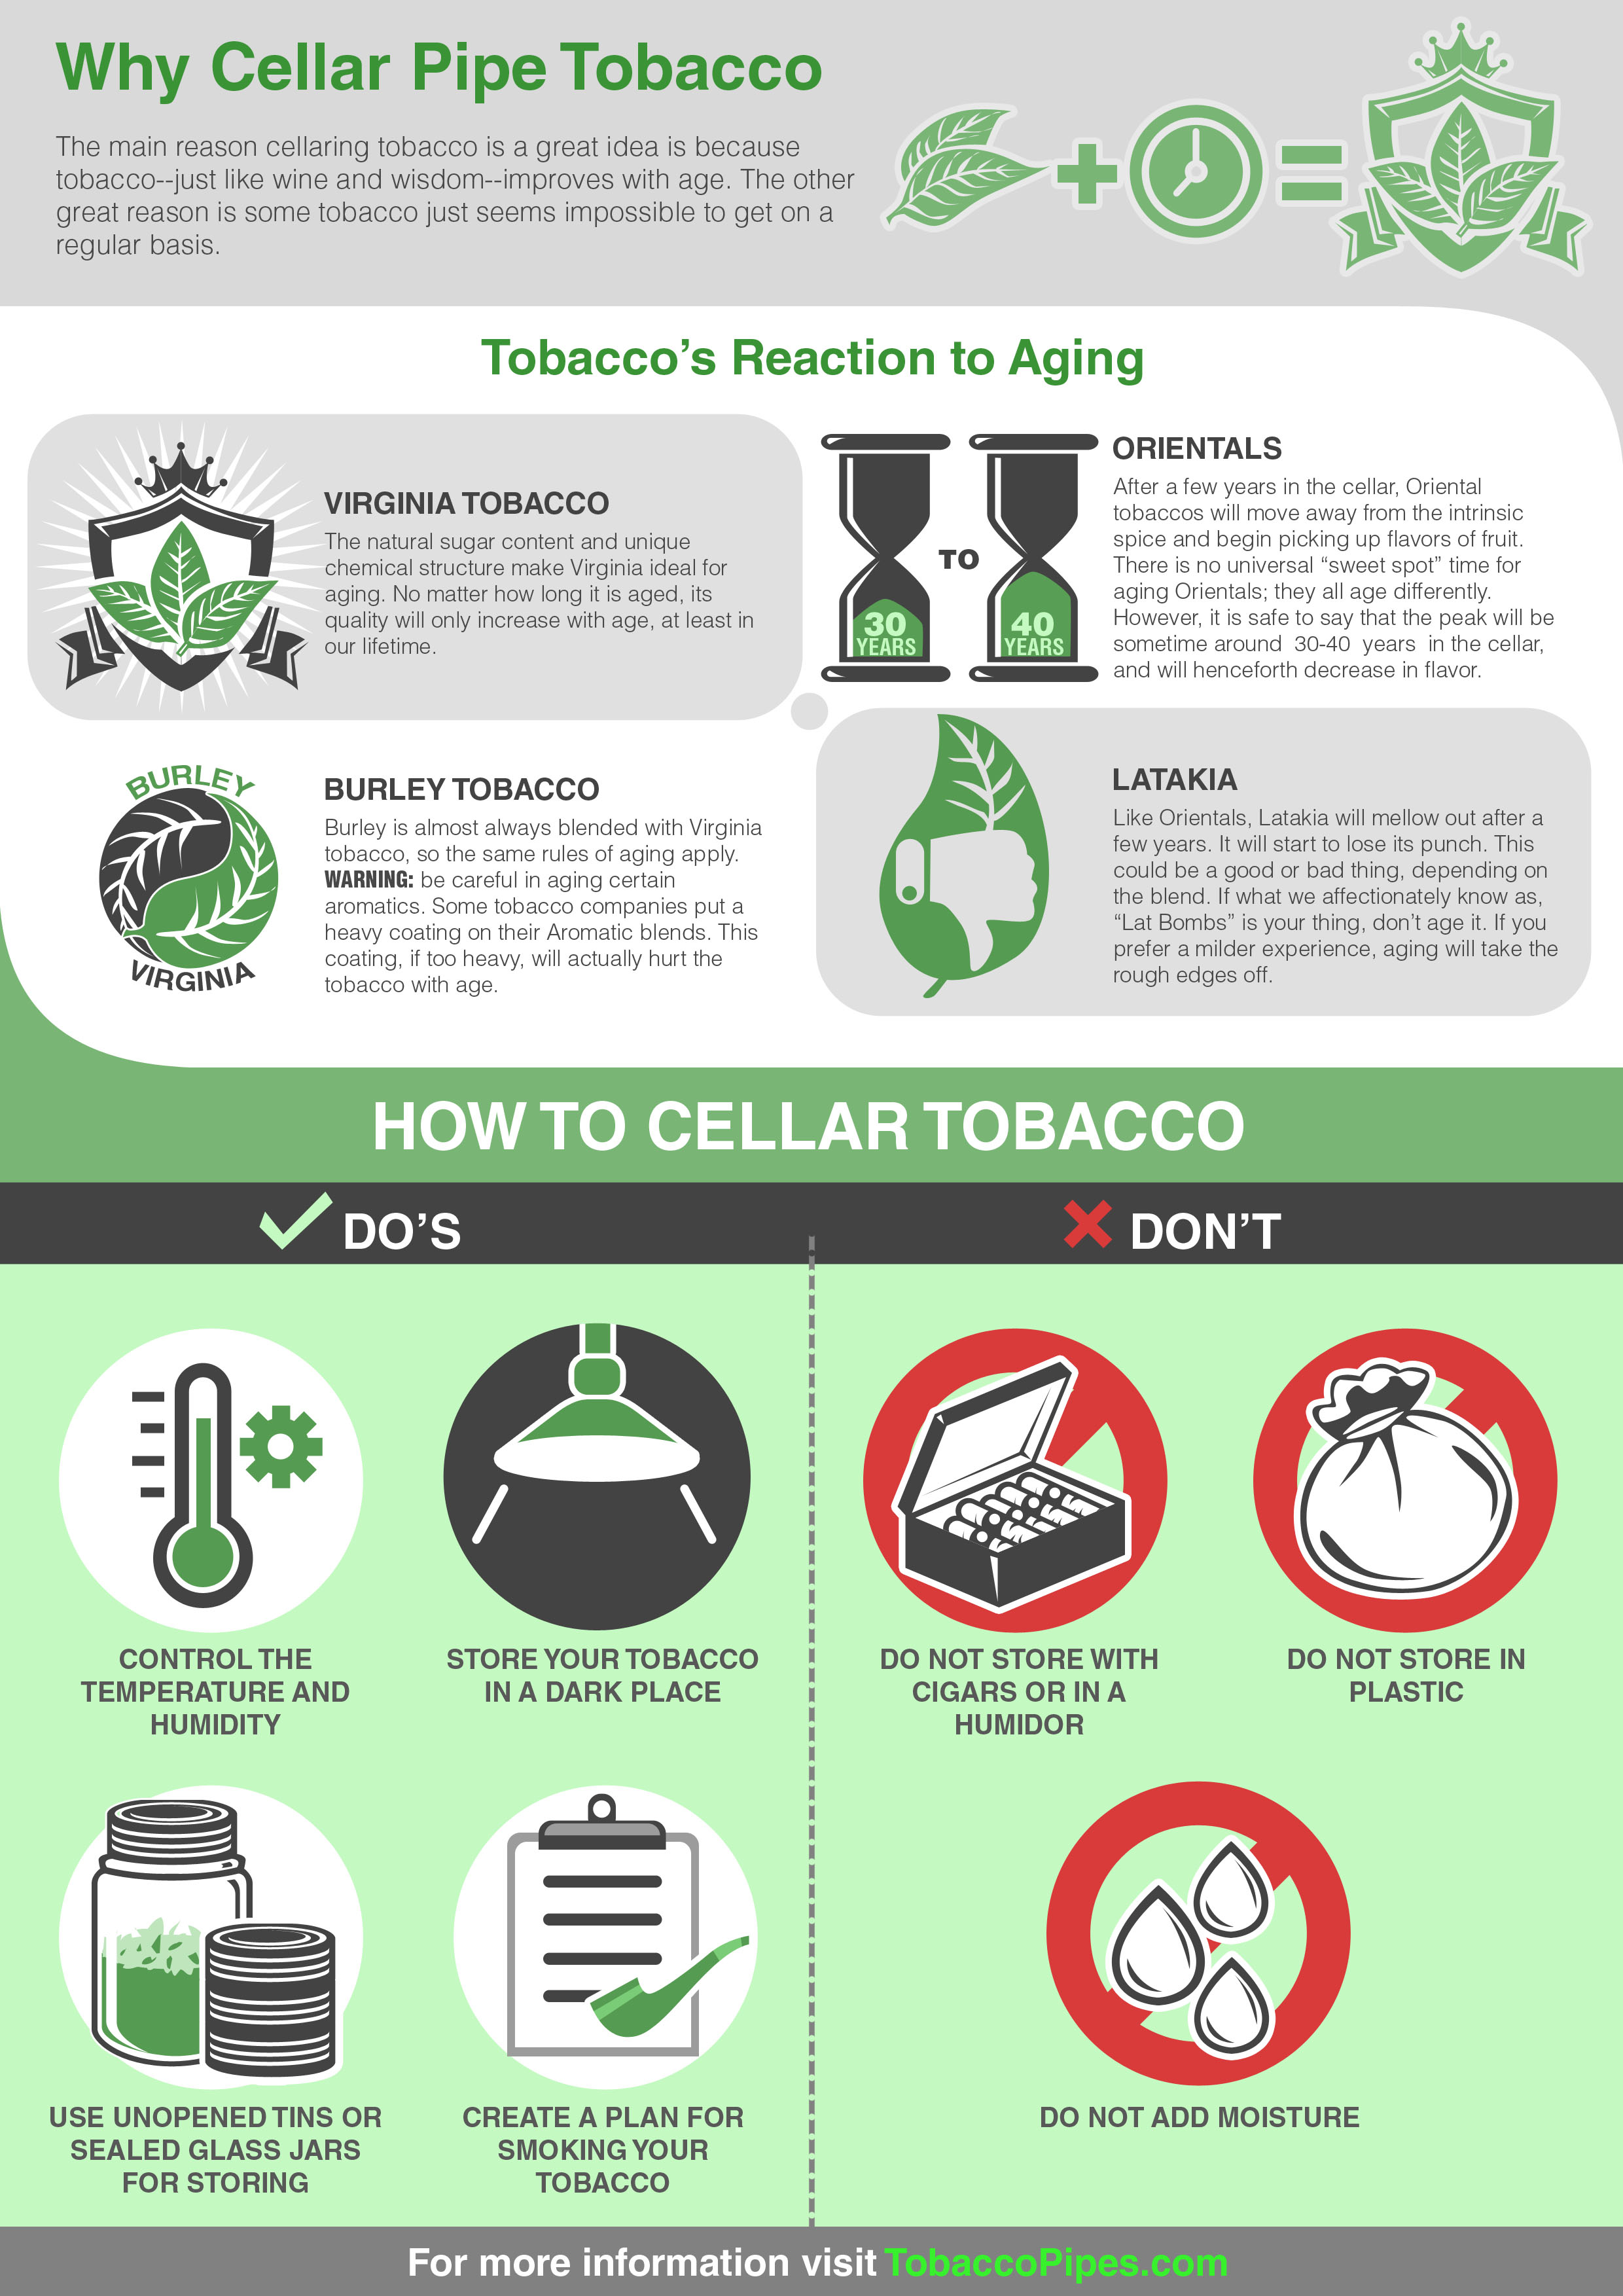 Cellaring Tobacco - Quick Tips for Beginners